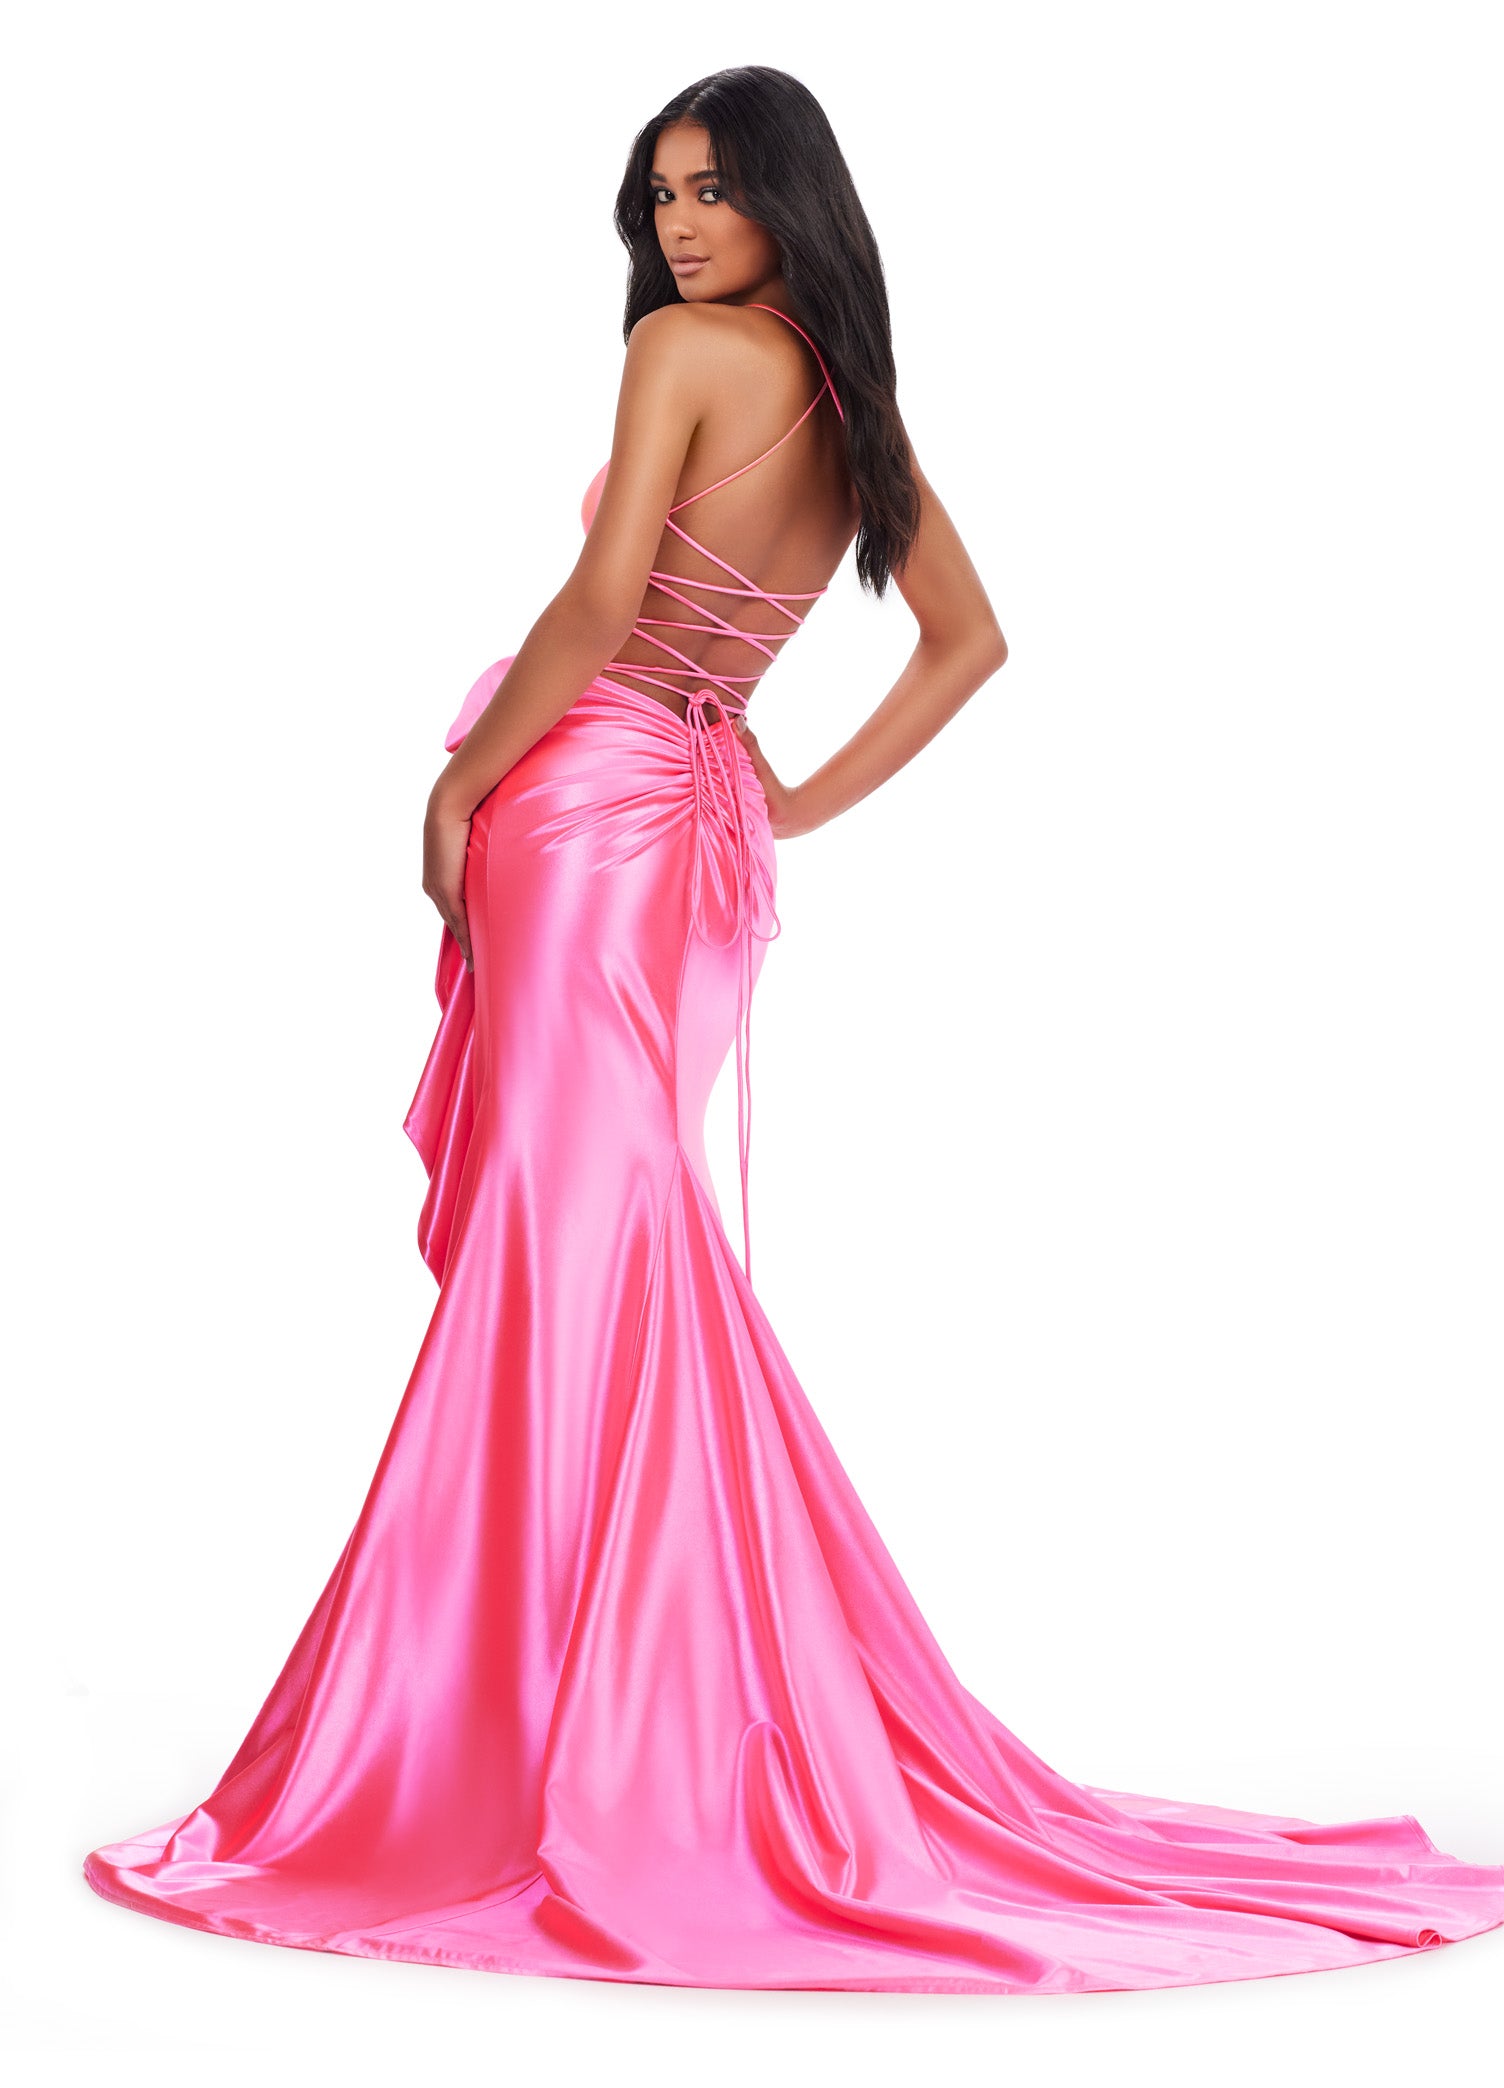 Be the belle of the ball in the Ashley Lauren 11638 Long Prom Dress. Featuring a corset top and spaghetti straps, this stunning gown exudes elegance. The cascading bow and ruffle details add a touch of drama, making it the perfect choice for any formal event or pageant. Edgy and fabulous! This shimmer jersey gown features a corset bodice with a bow and cascading ruffle detail. The lace up back and spaghetti straps make this extra fab.